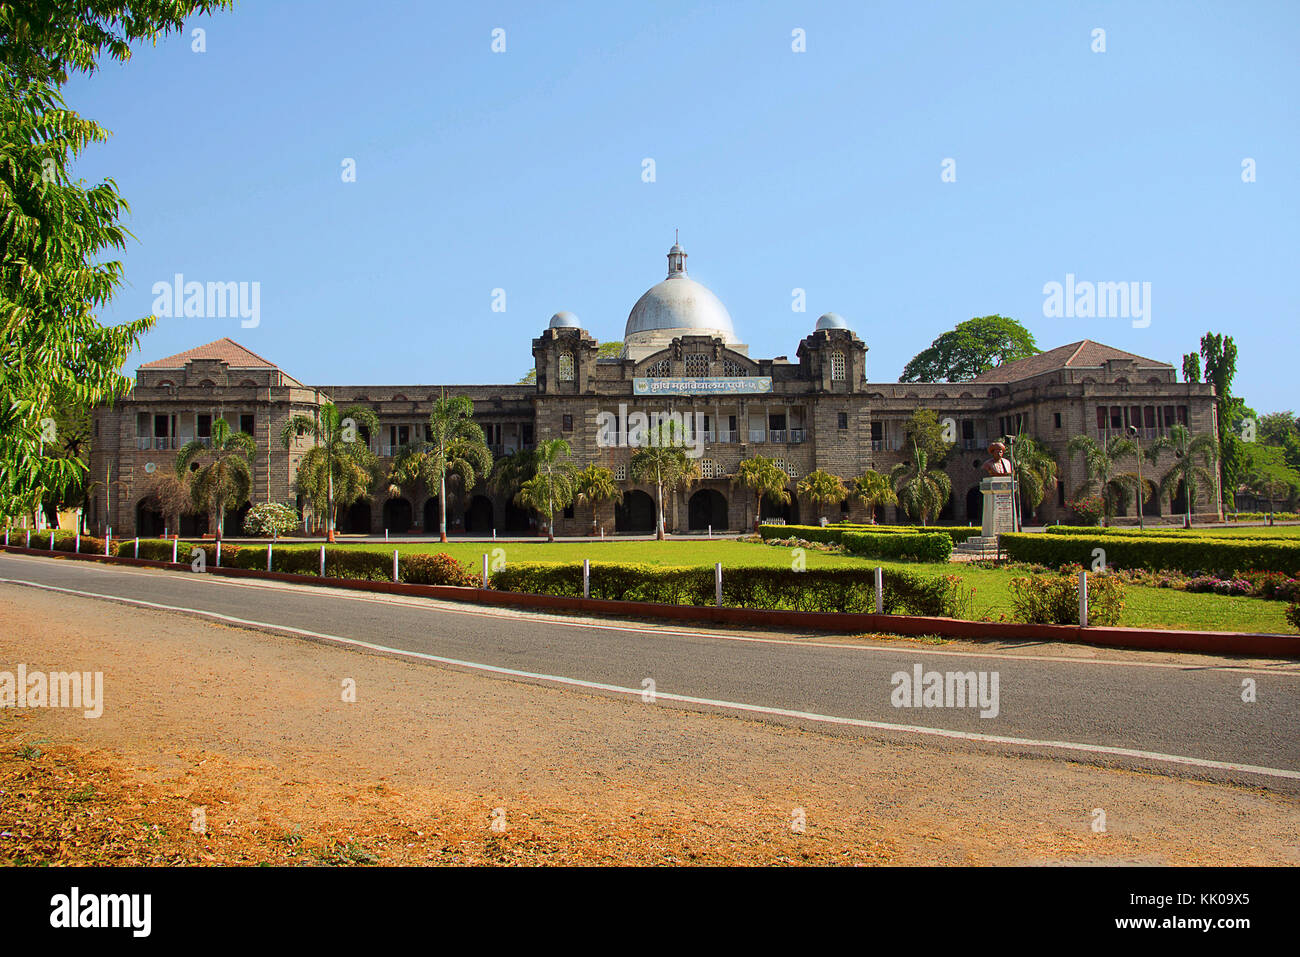 Exterior view of Savitribai Phule agriculture college, Pune Stock Photo